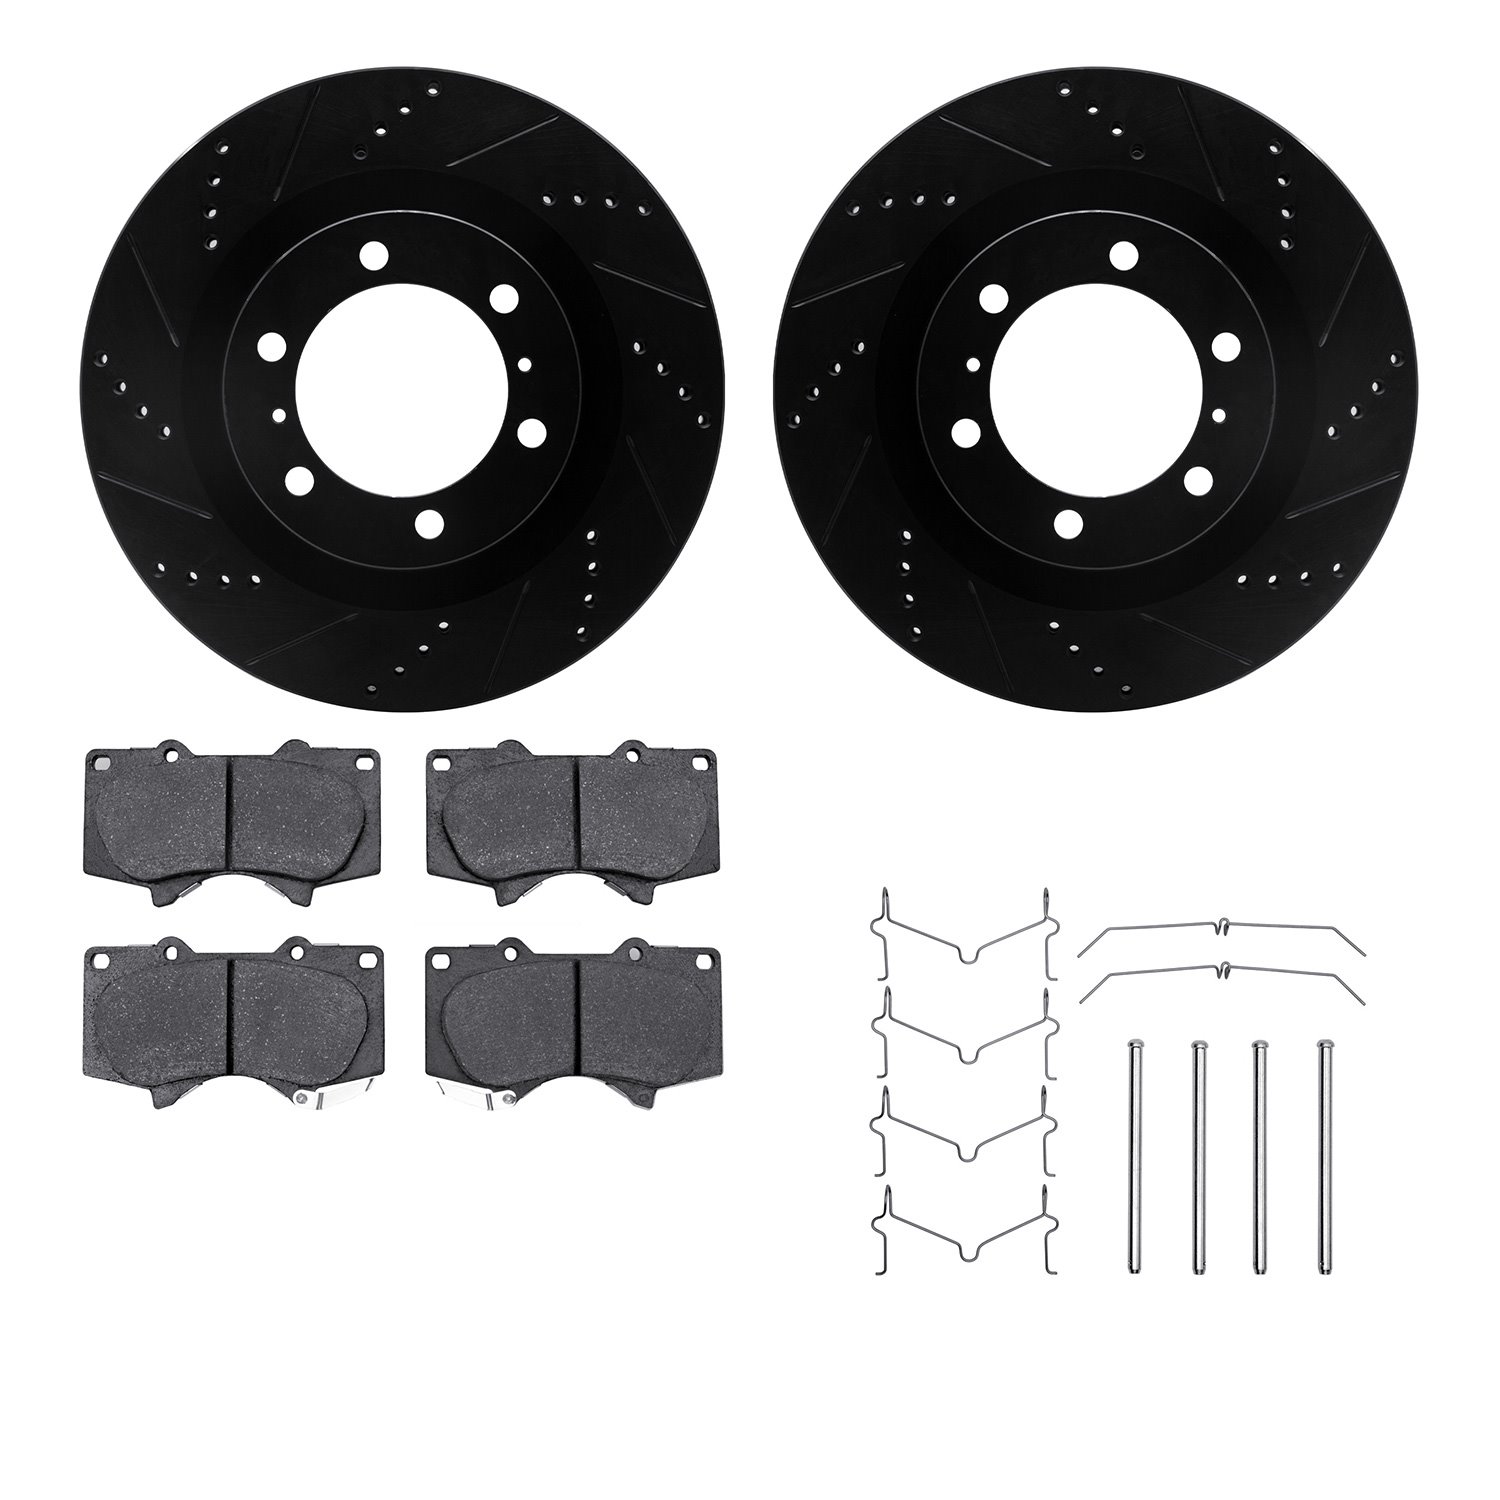 8412-76022 Drilled/Slotted Brake Rotors with Ultimate-Duty Brake Pads Kit & Hardware [Black], Fits Select Lexus/Toyota/Scion, Po